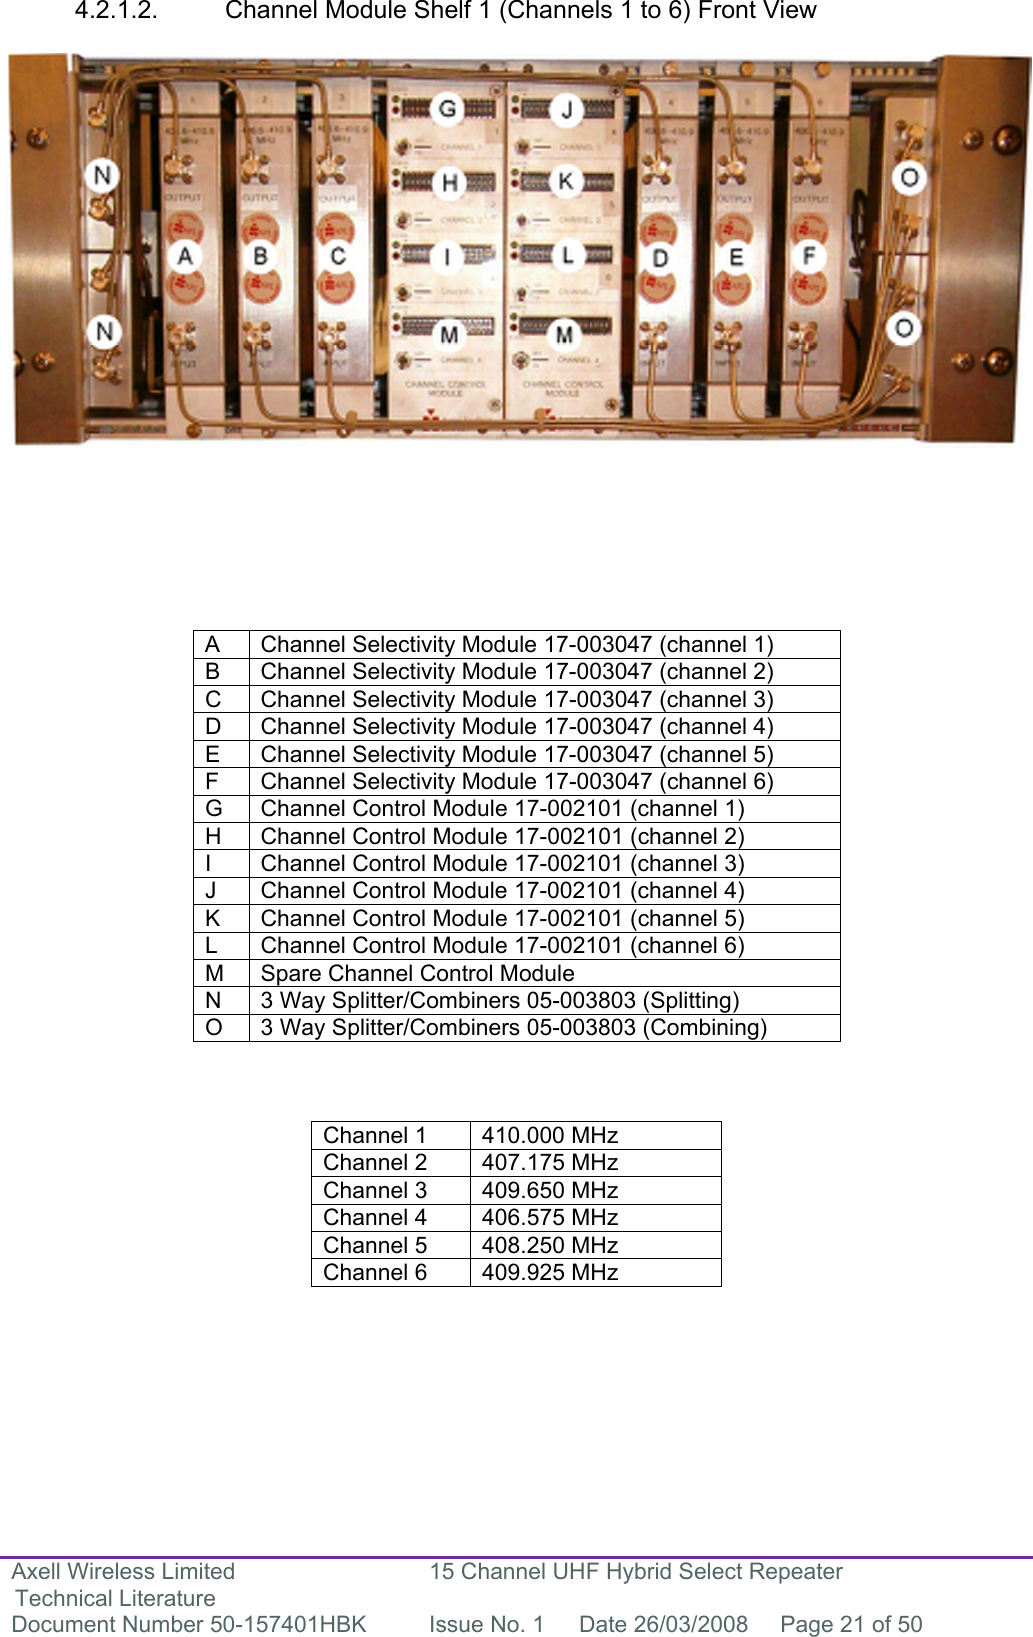 Axell Wireless Limited Technical Literature 15 Channel UHF Hybrid Select Repeater Document Number 50-157401HBK  Issue No. 1  Date 26/03/2008  Page 21 of 50   4.2.1.2.  Channel Module Shelf 1 (Channels 1 to 6) Front View                        A  Channel Selectivity Module 17-003047 (channel 1) B  Channel Selectivity Module 17-003047 (channel 2) C  Channel Selectivity Module 17-003047 (channel 3) D  Channel Selectivity Module 17-003047 (channel 4) E  Channel Selectivity Module 17-003047 (channel 5) F  Channel Selectivity Module 17-003047 (channel 6) G  Channel Control Module 17-002101 (channel 1) H  Channel Control Module 17-002101 (channel 2) I  Channel Control Module 17-002101 (channel 3) J  Channel Control Module 17-002101 (channel 4) K  Channel Control Module 17-002101 (channel 5) L  Channel Control Module 17-002101 (channel 6) M  Spare Channel Control Module  N  3 Way Splitter/Combiners 05-003803 (Splitting) O  3 Way Splitter/Combiners 05-003803 (Combining)    Channel 1  410.000 MHz Channel 2  407.175 MHz Channel 3  409.650 MHz Channel 4  406.575 MHz Channel 5  408.250 MHz Channel 6  409.925 MHz        